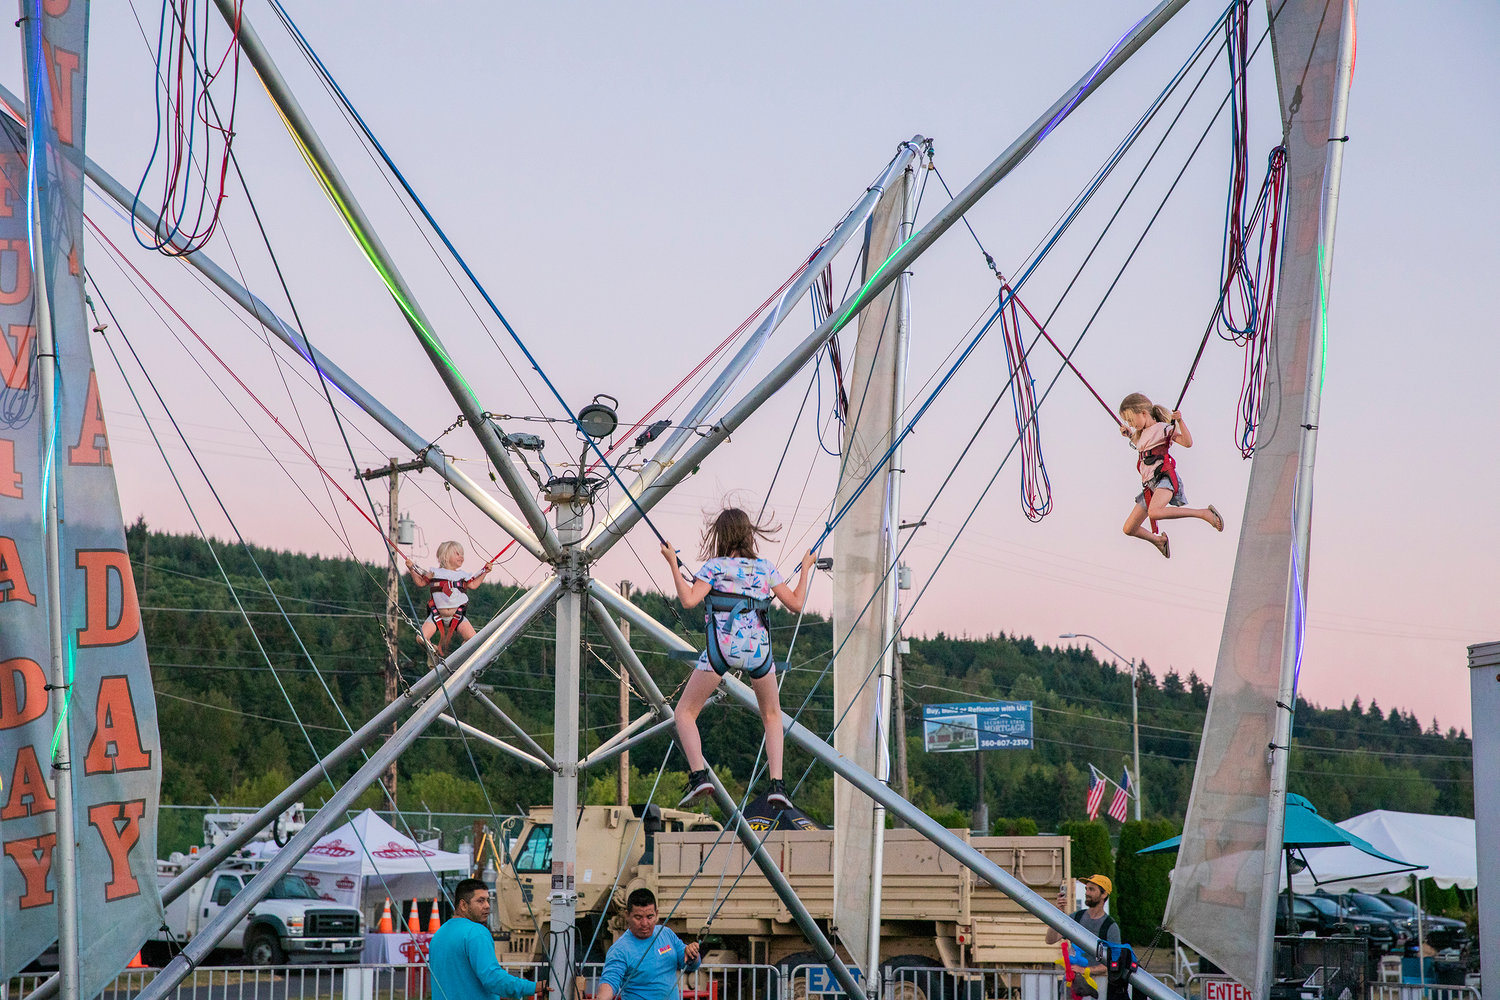 Kids smile and bounce at the Southwest Washington Fairgrounds Tuesday evening in Centralia.